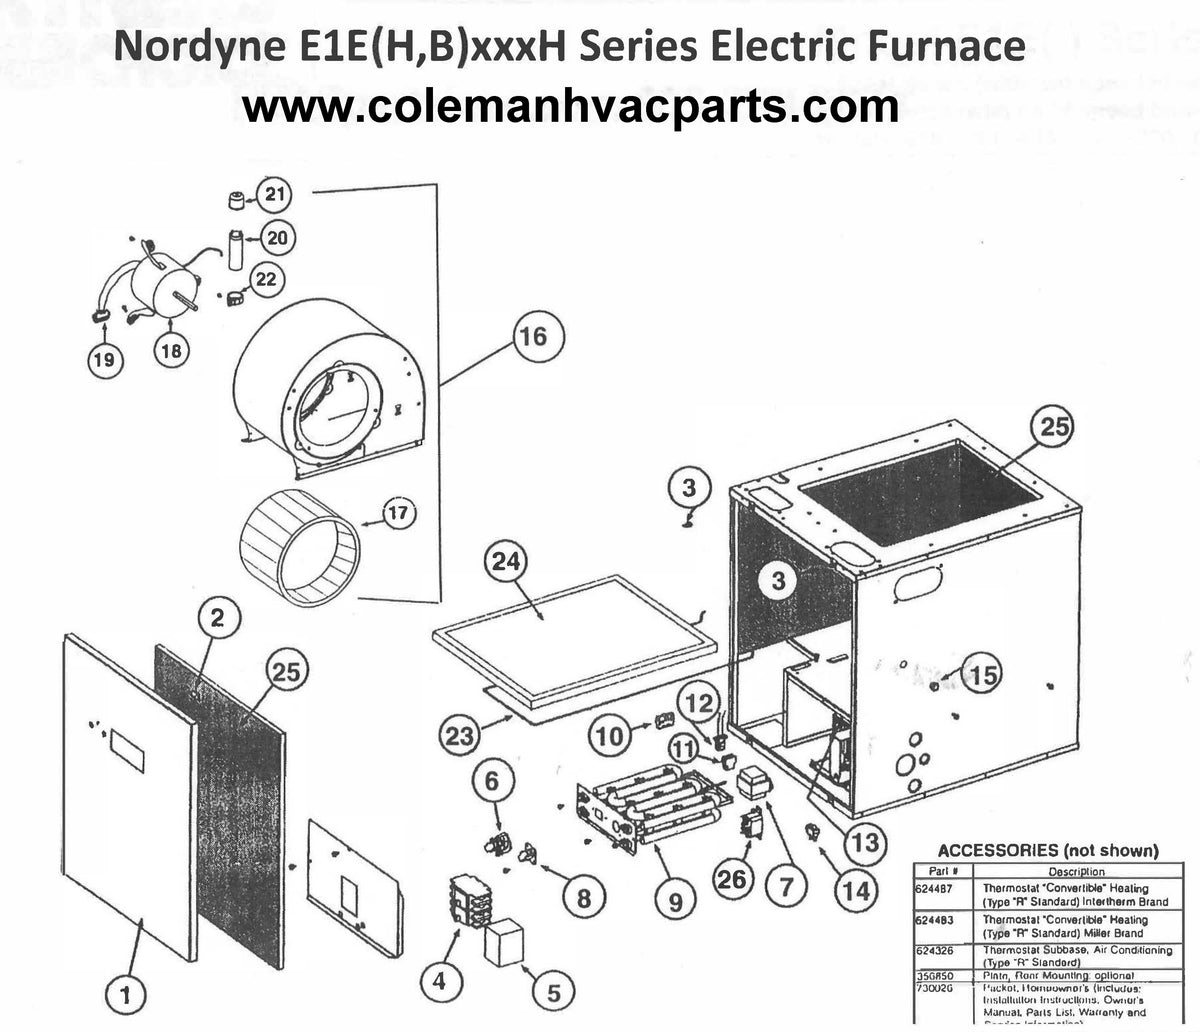 E1EH017H Nordyne Electric Furnace Parts – HVACpartstore intertherm gas furnace diagram 